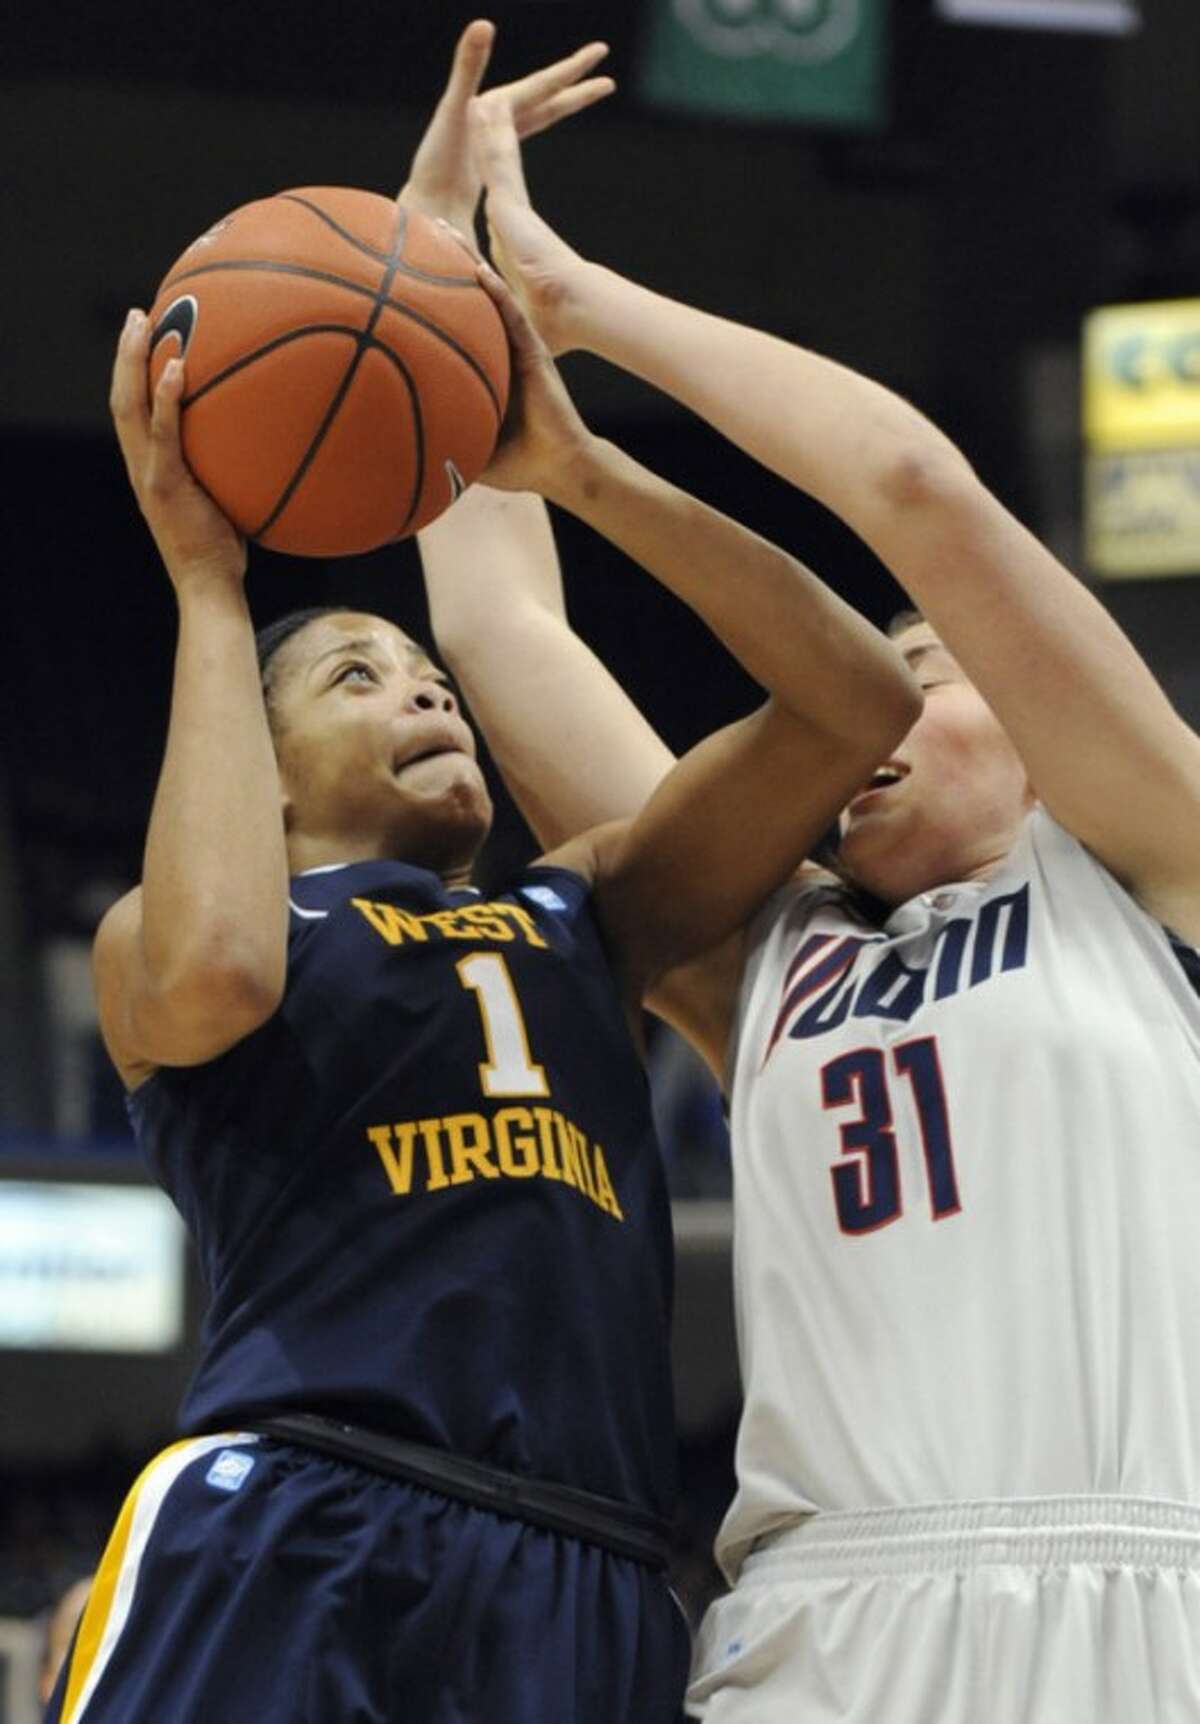 West Virginia's Christal Caldwell, left, is fouled by Connecticut's Stefanie Dolson, right, in the second half of an NCAA college basketball game in Hartford, Conn., Wednesday, Jan. 4, 2012. (AP Photo/Jessica Hill)